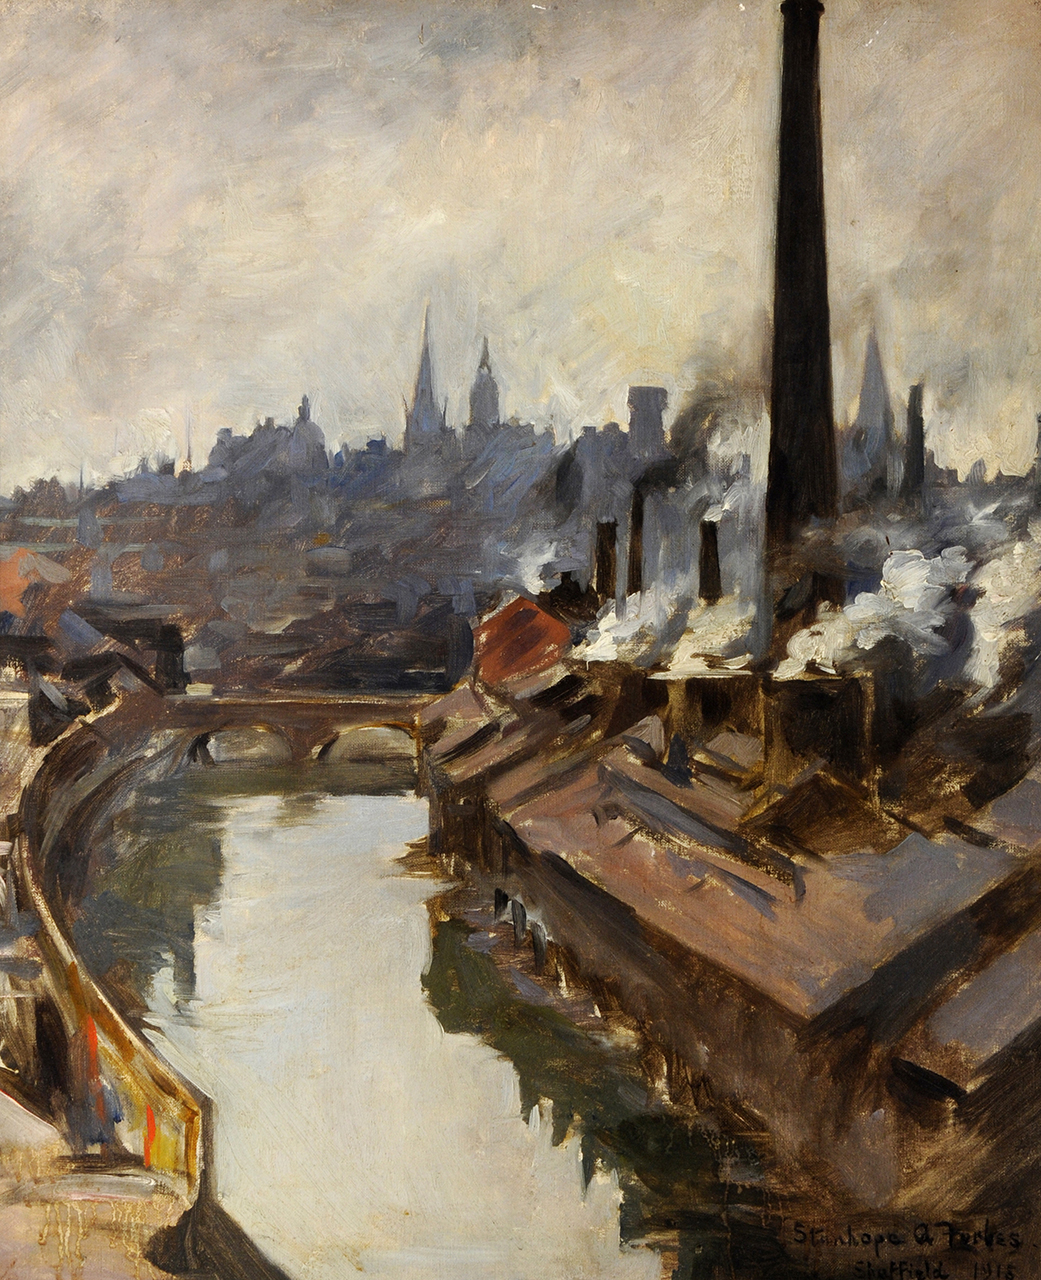 An industrial city scape showing rooftops and a number of smoking chimneys. To the left of the painting is a river with a bridge crossing over it.